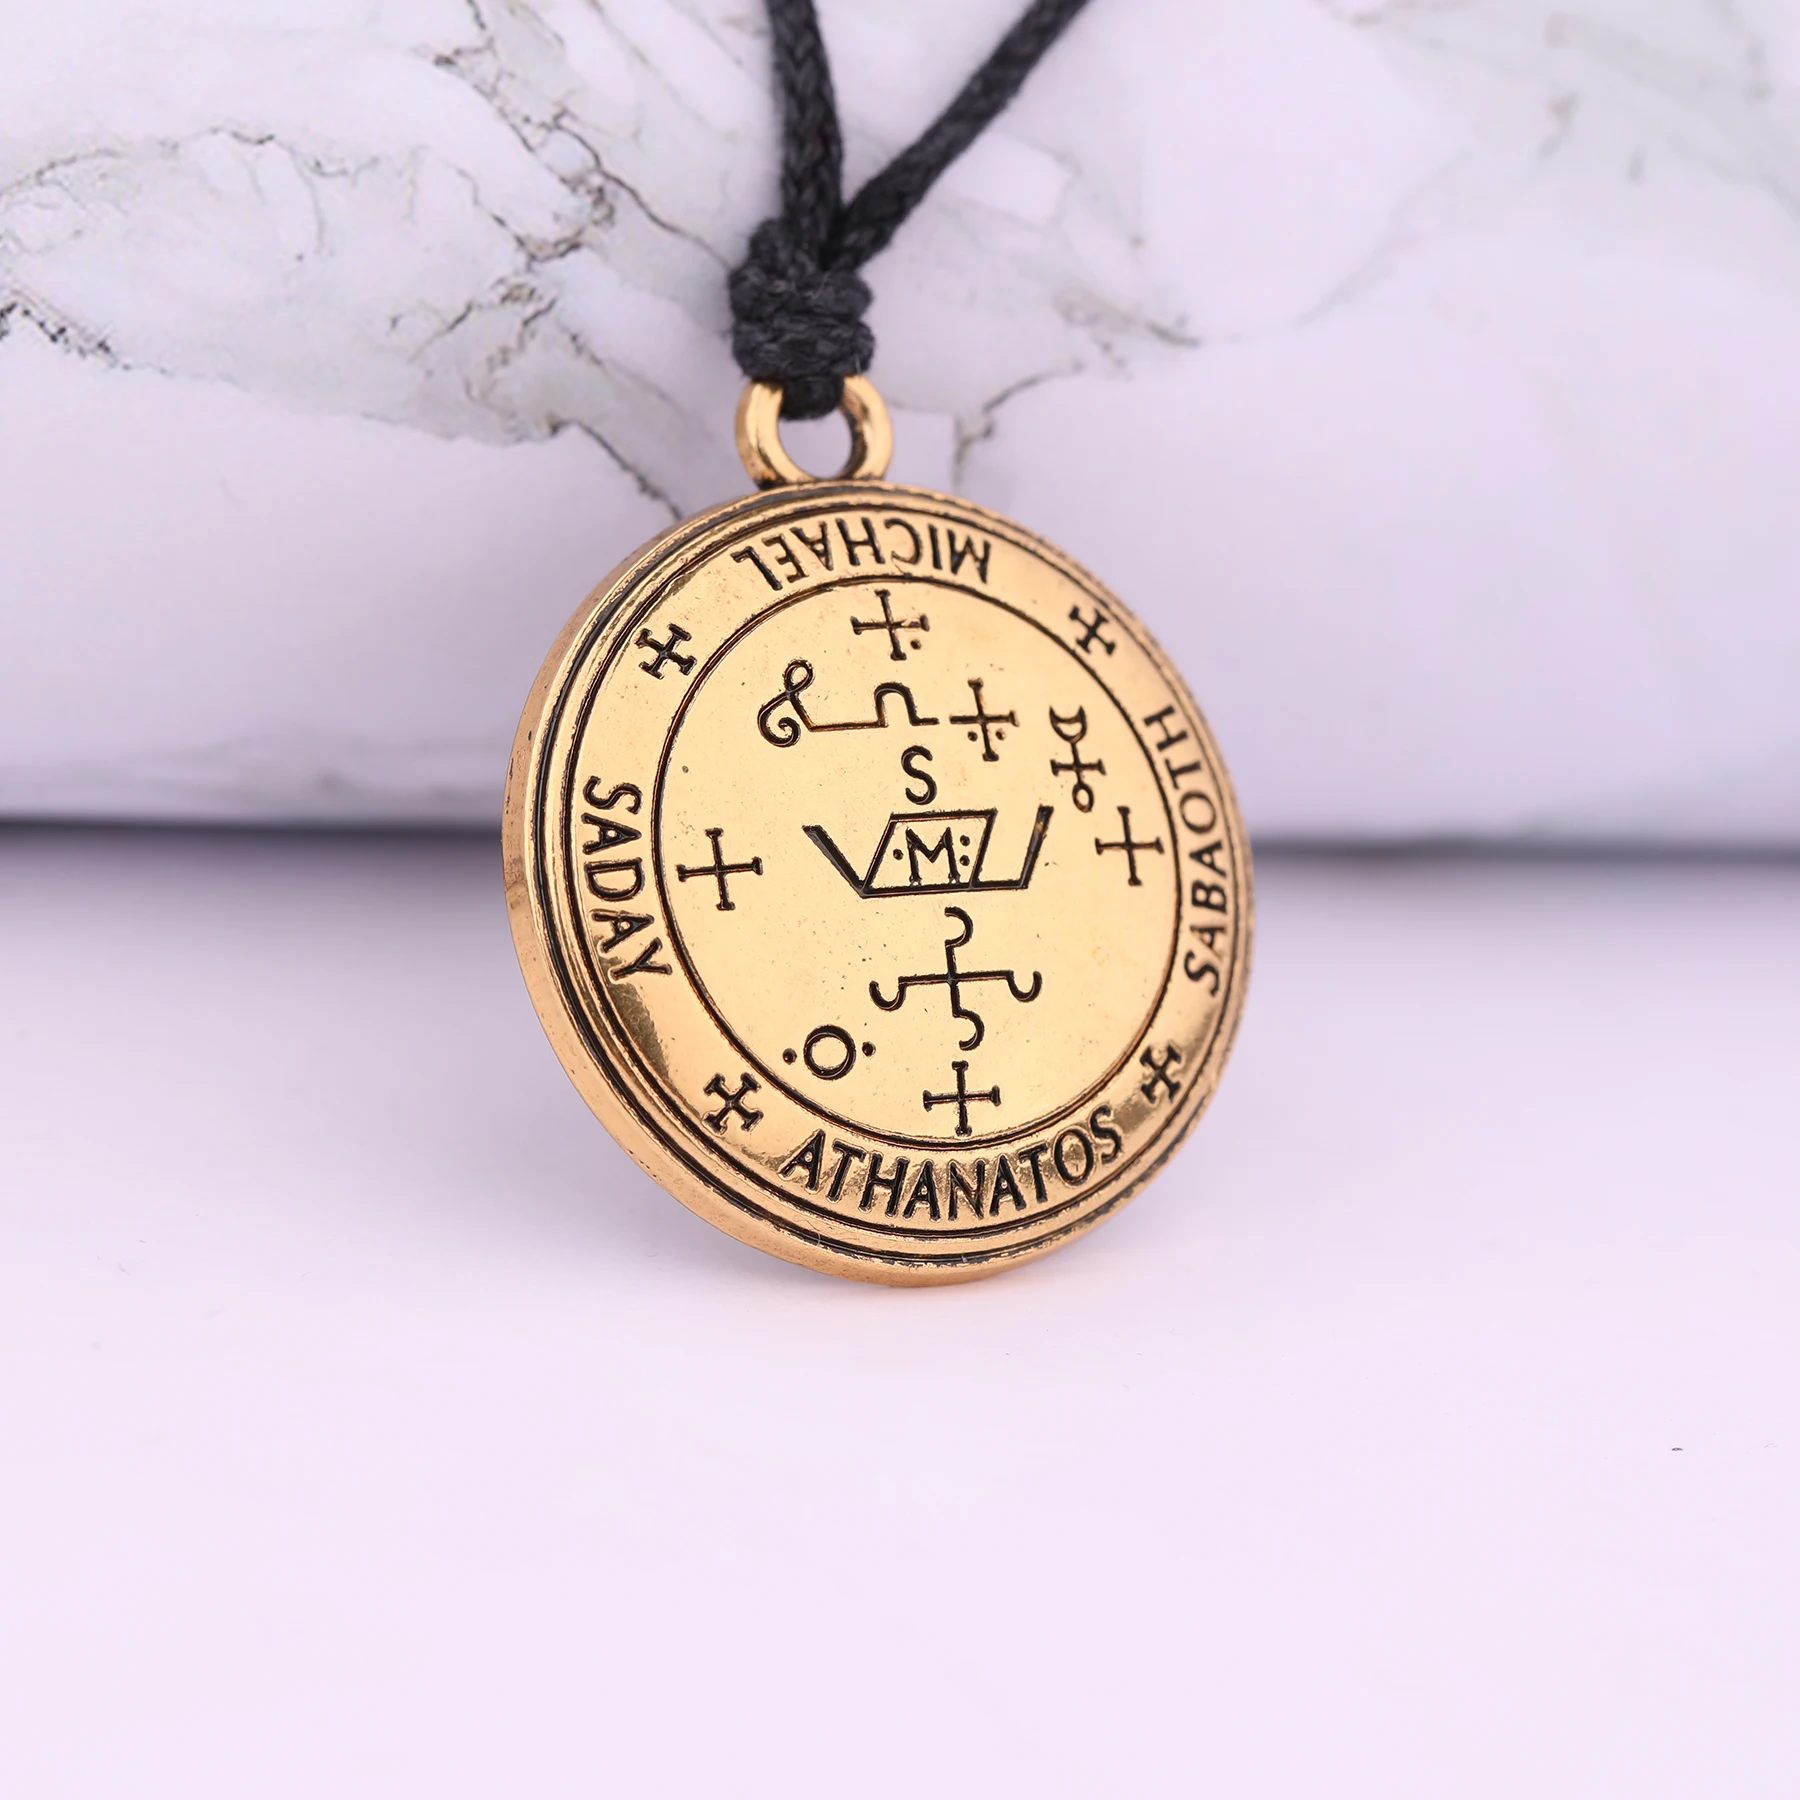 

Men's Fashion Viking Jewelry Sigil of Archangel Thavael Enochian Pendant Necklaces Talisman Amulet Gifts for Christmas, As picture